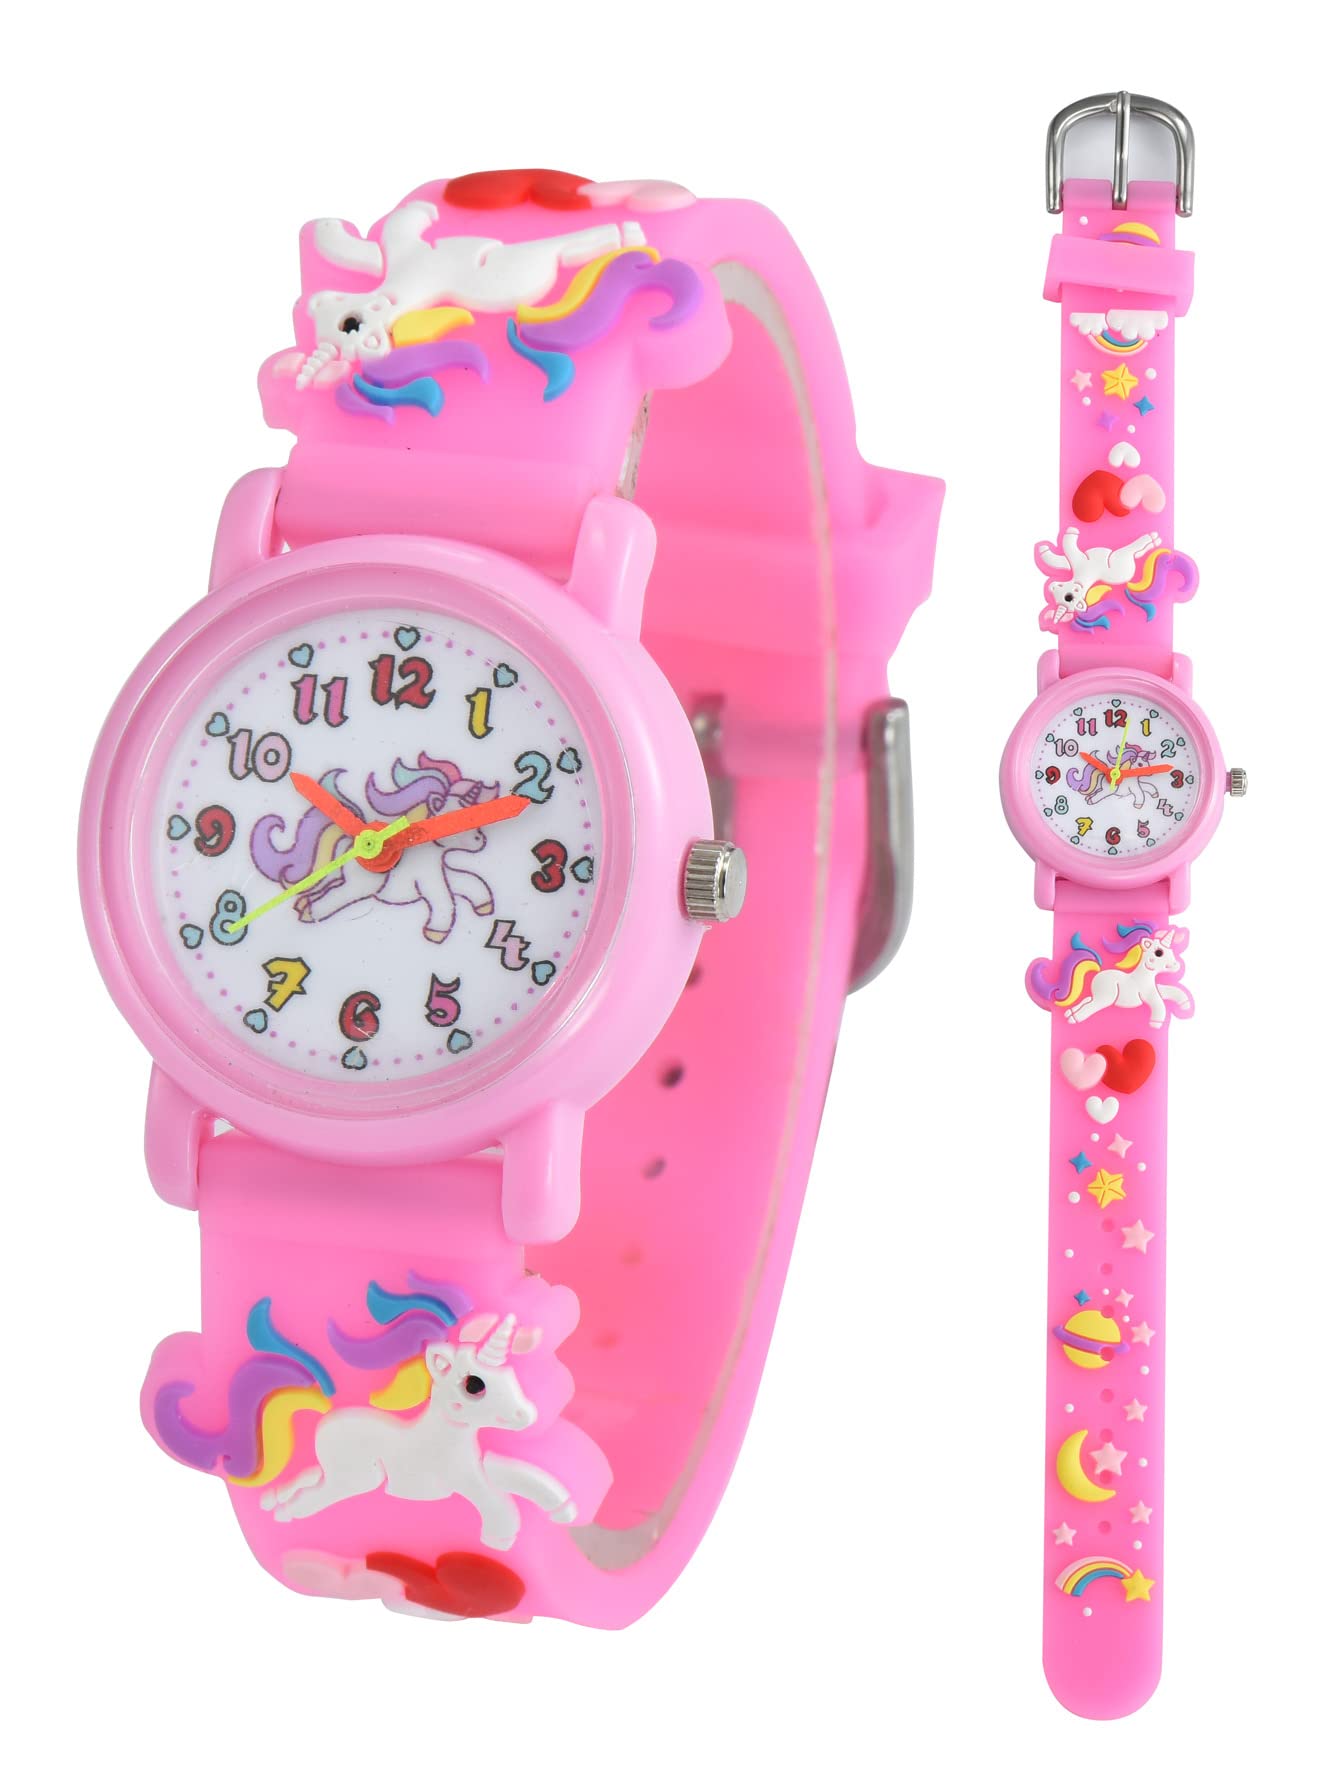 Child's love Girls Watches Kids Watches 3D Cartoon Daily Using Waterproof Watches for Girls Gifts for Girls Ages 3-12 Toys for 3 4 5 6 7 Year Old Girls Kids Gifts